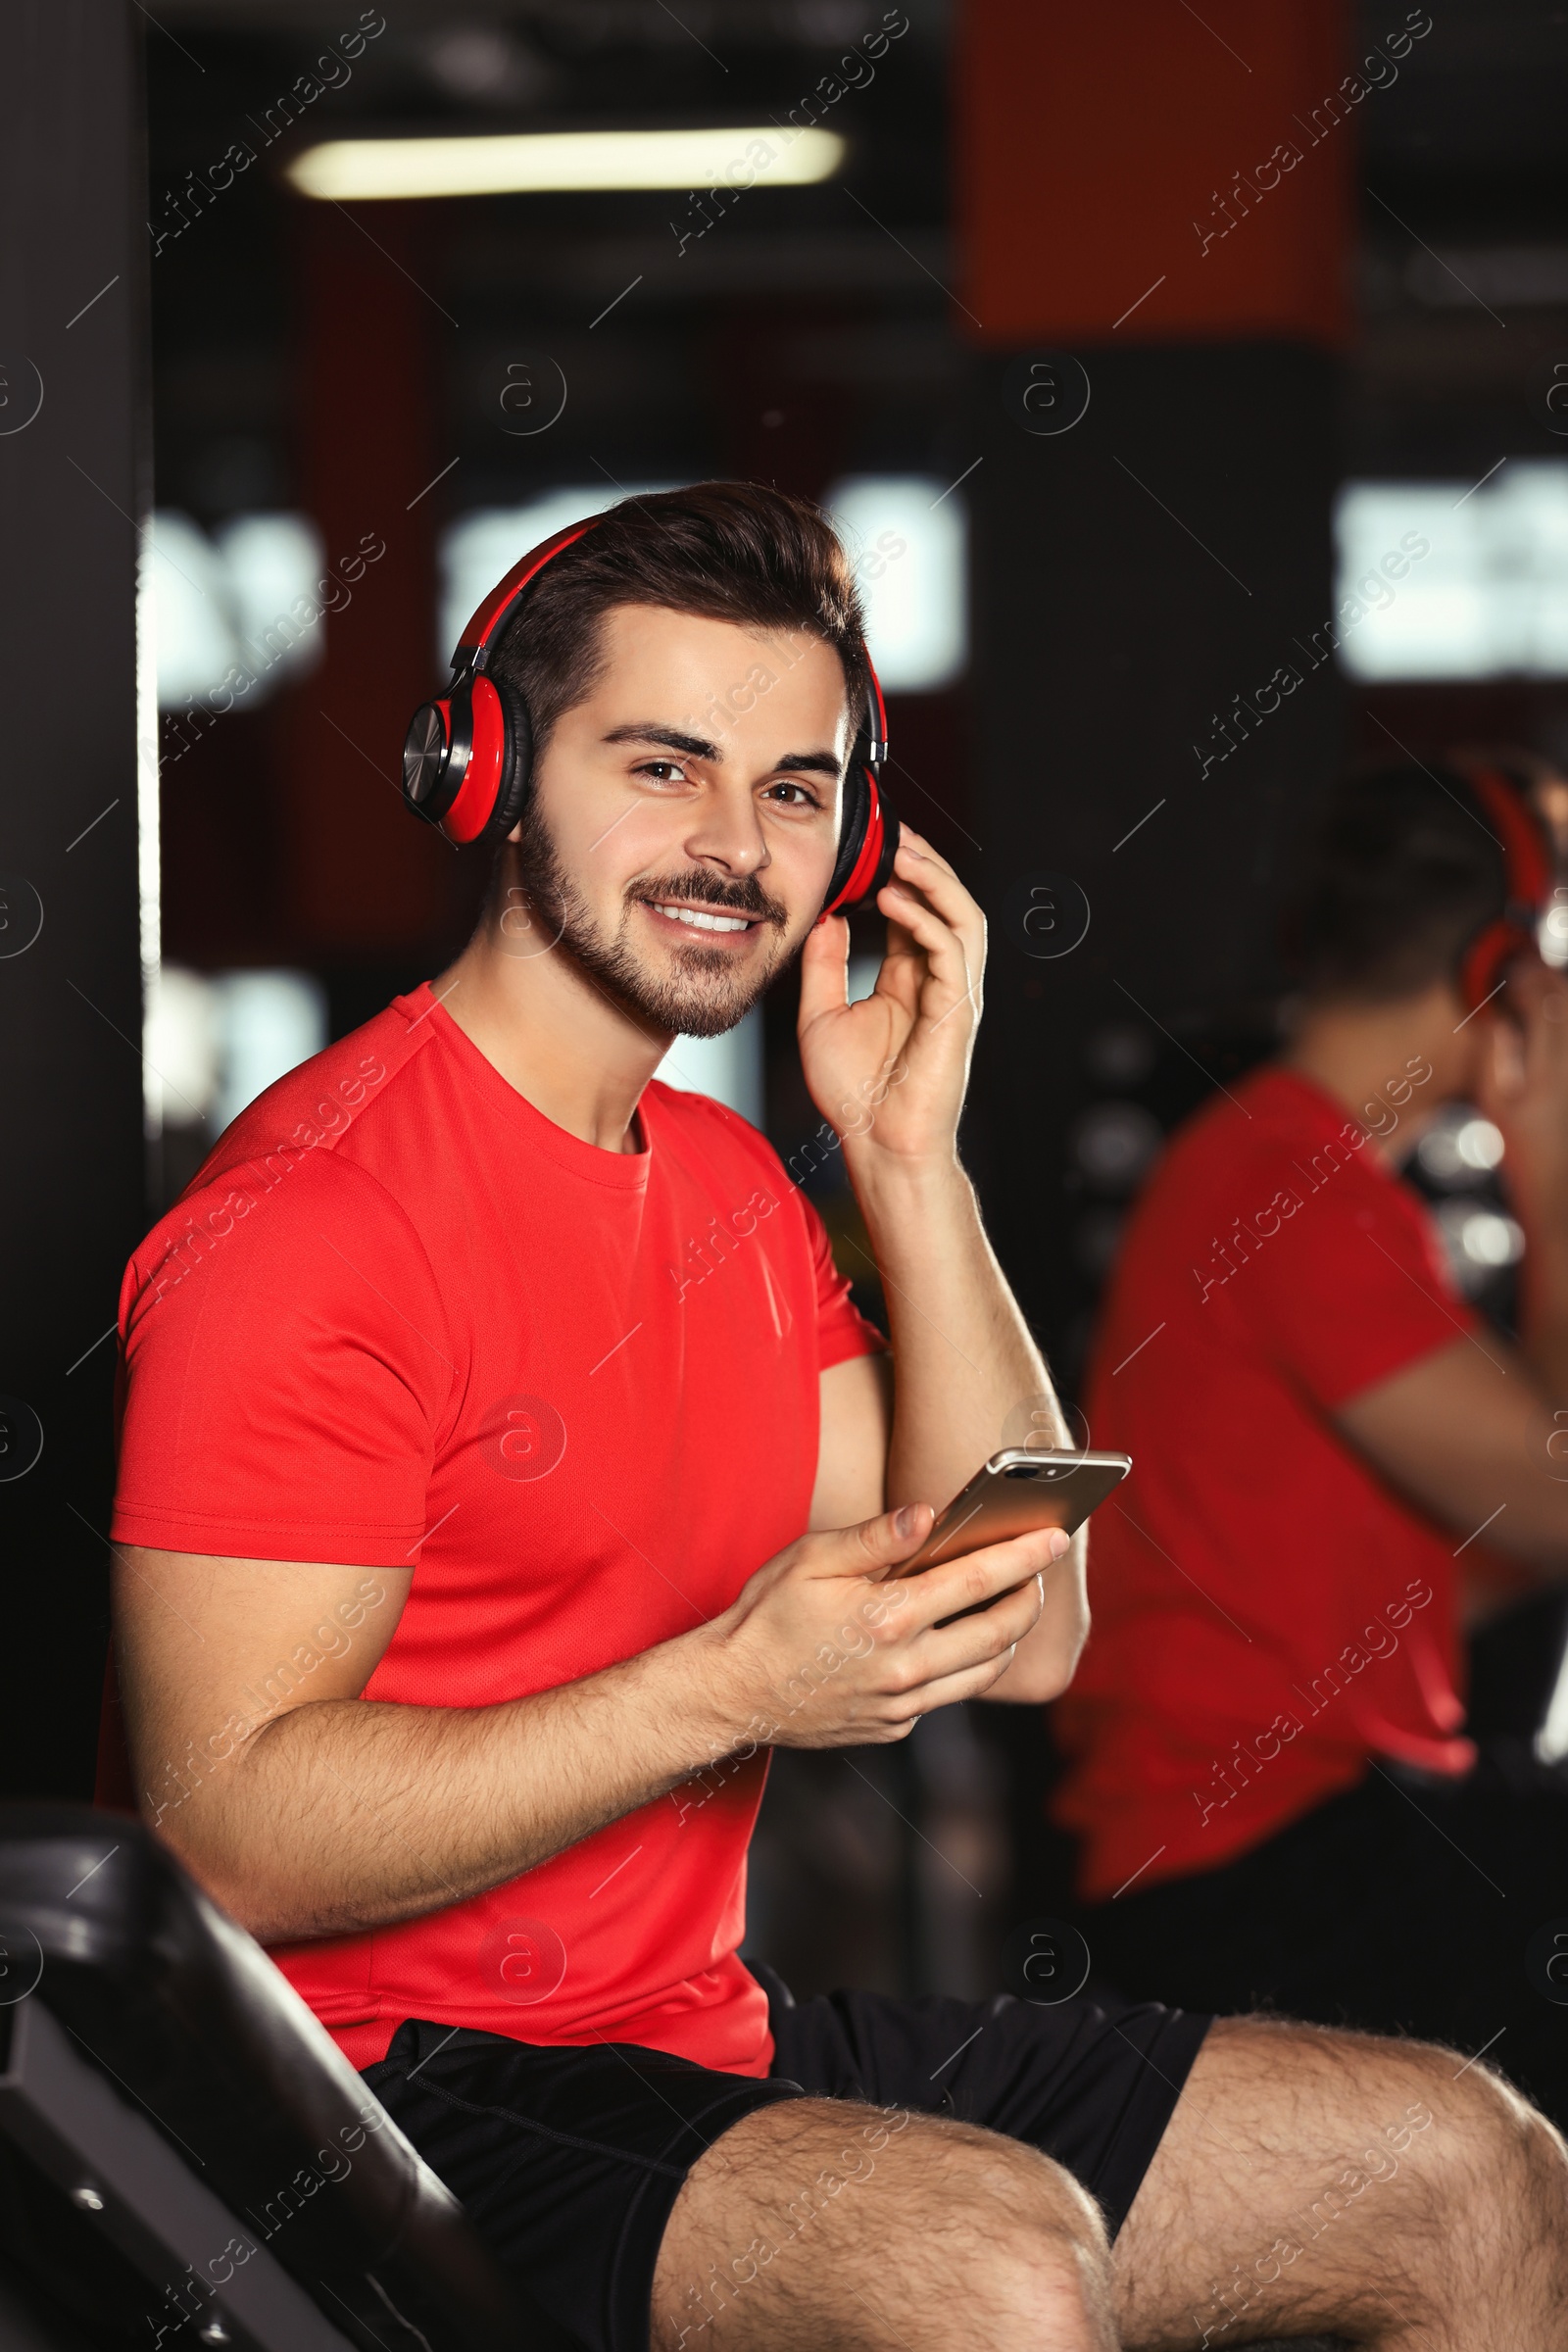 Photo of Young man with headphones listening to music on mobile device at gym